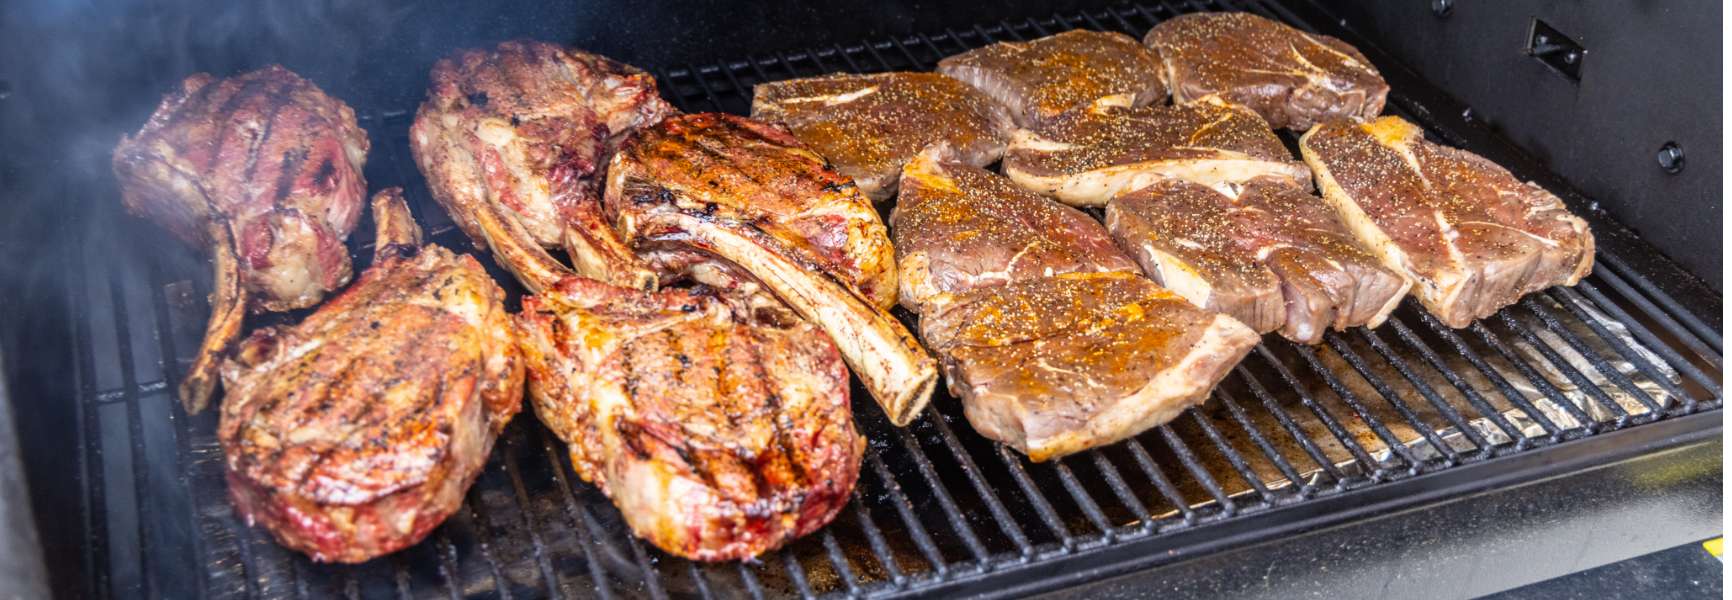 Juicy steaks cooking on a grill